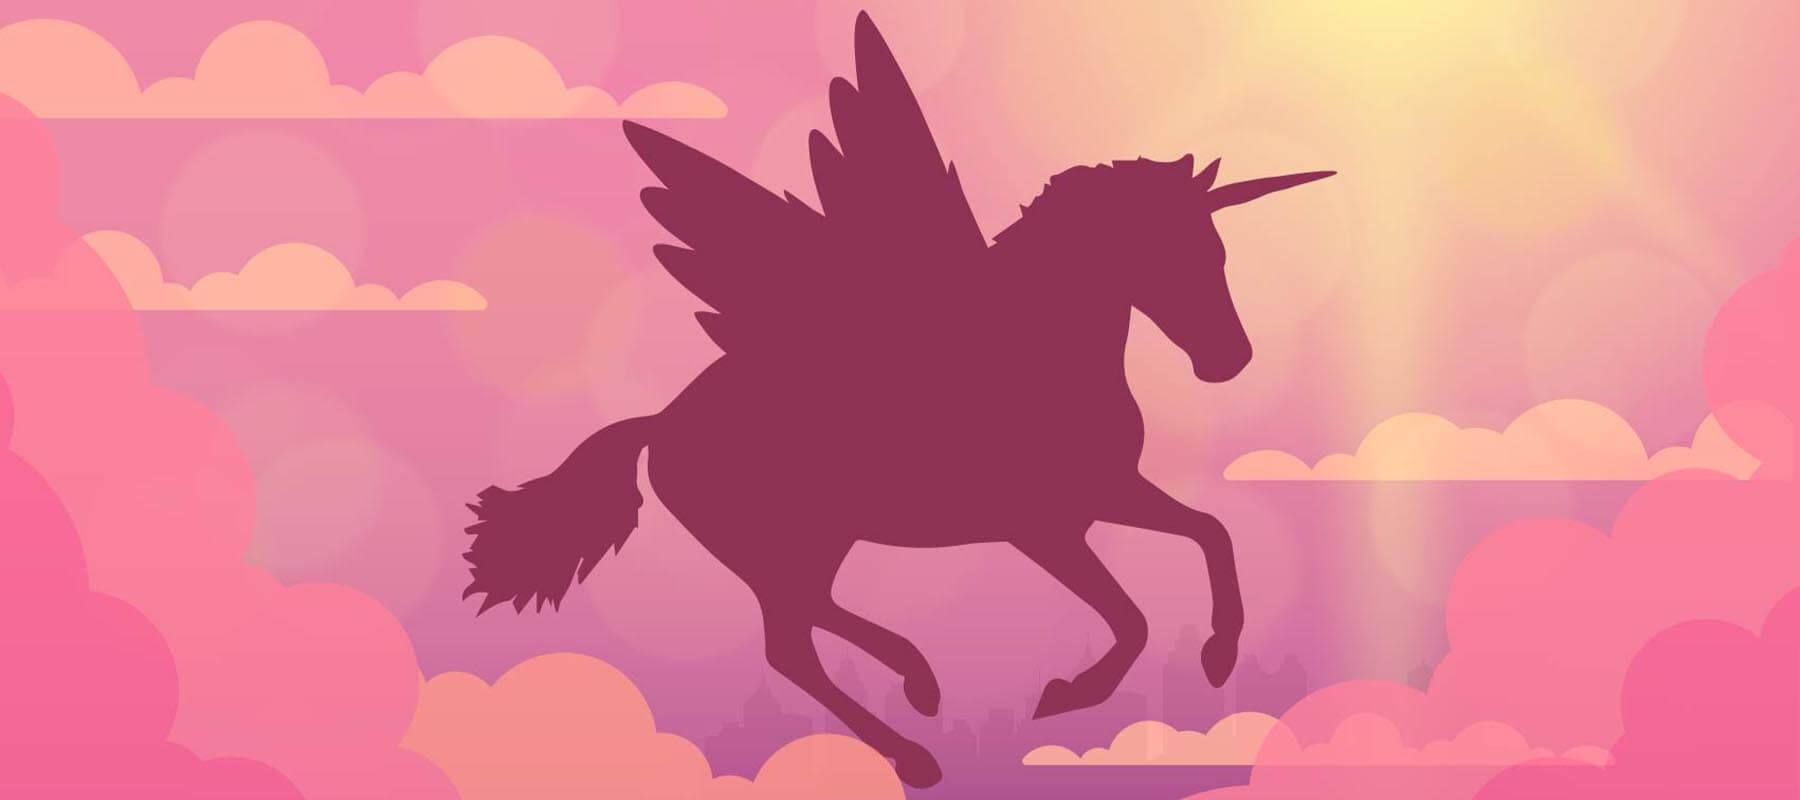 real unicorns found alive with wings